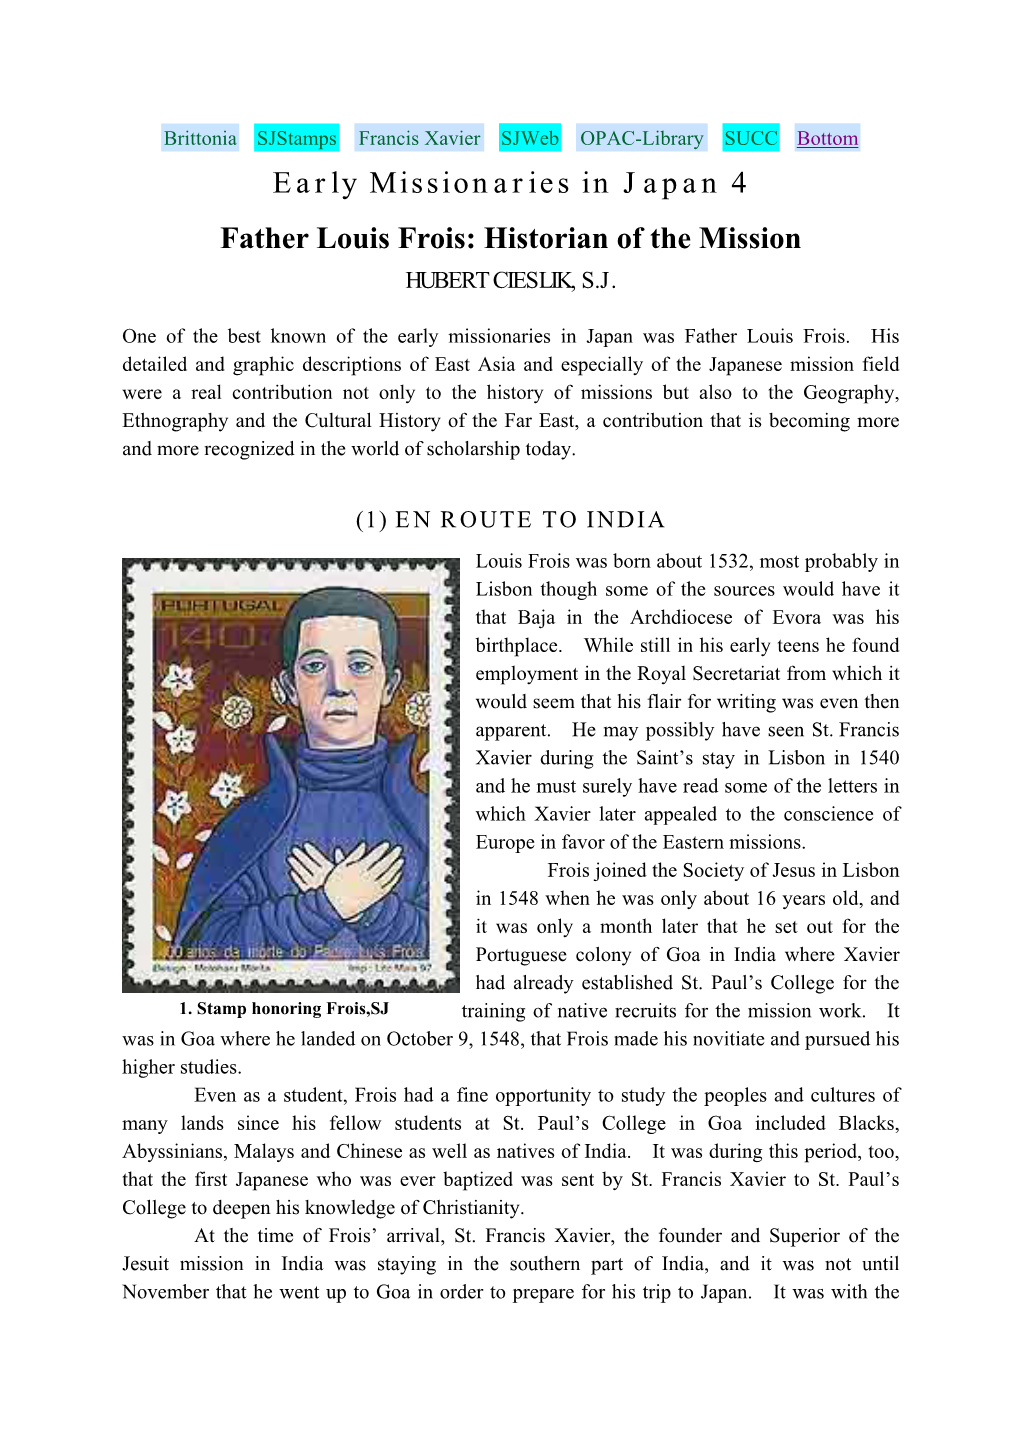 Early Missionaries in Japan 4 Father Louis Frois: Historian of the Mission HUBERT CIESLIK, S.J